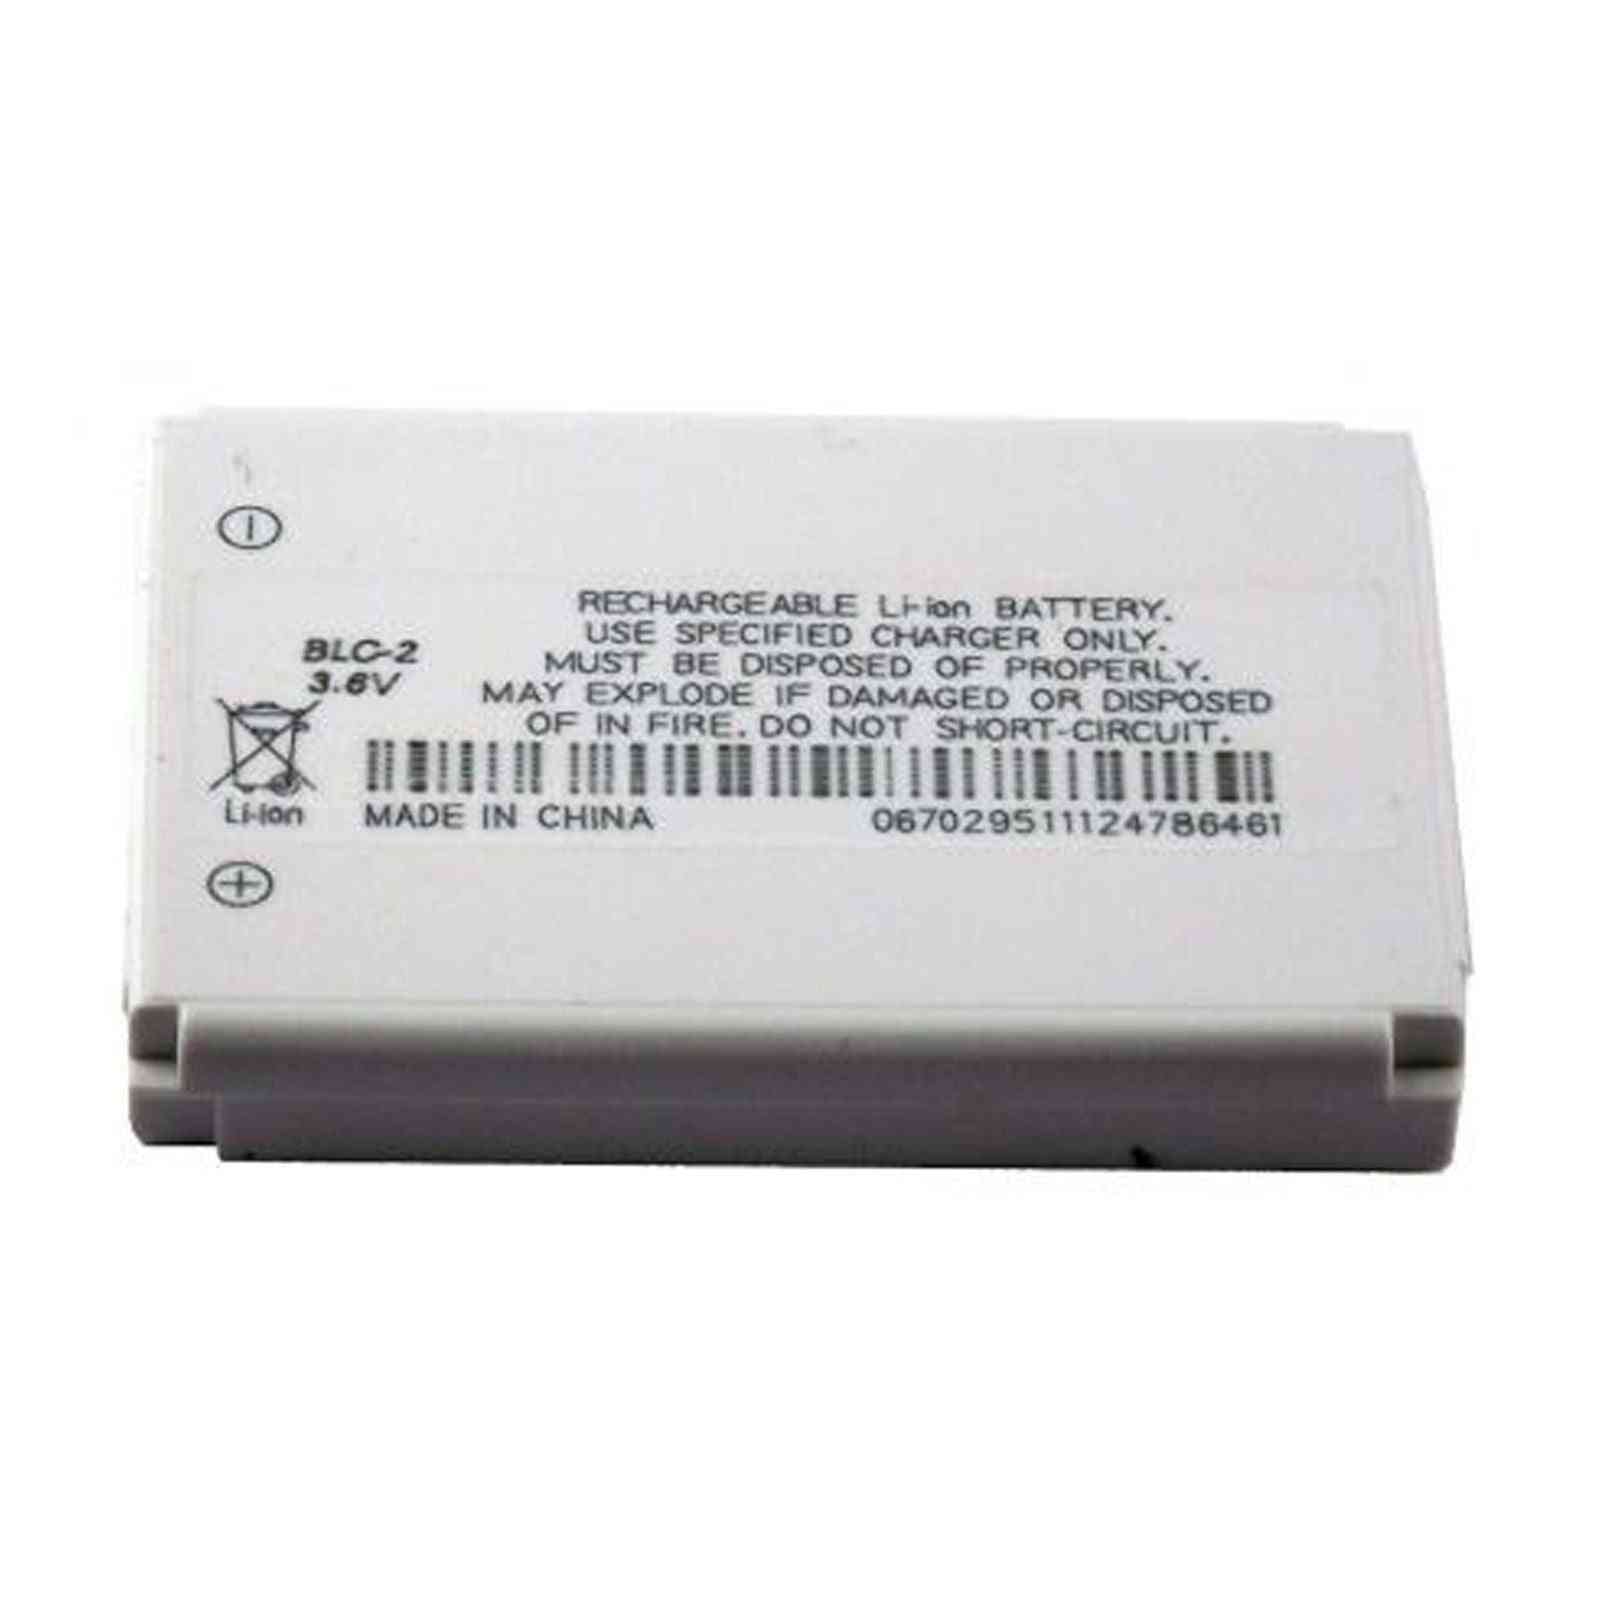 Rechargeable Blc-2 Li-ion Polymer Battery Replacement For 3310 3330 3315 3350 3510 6650